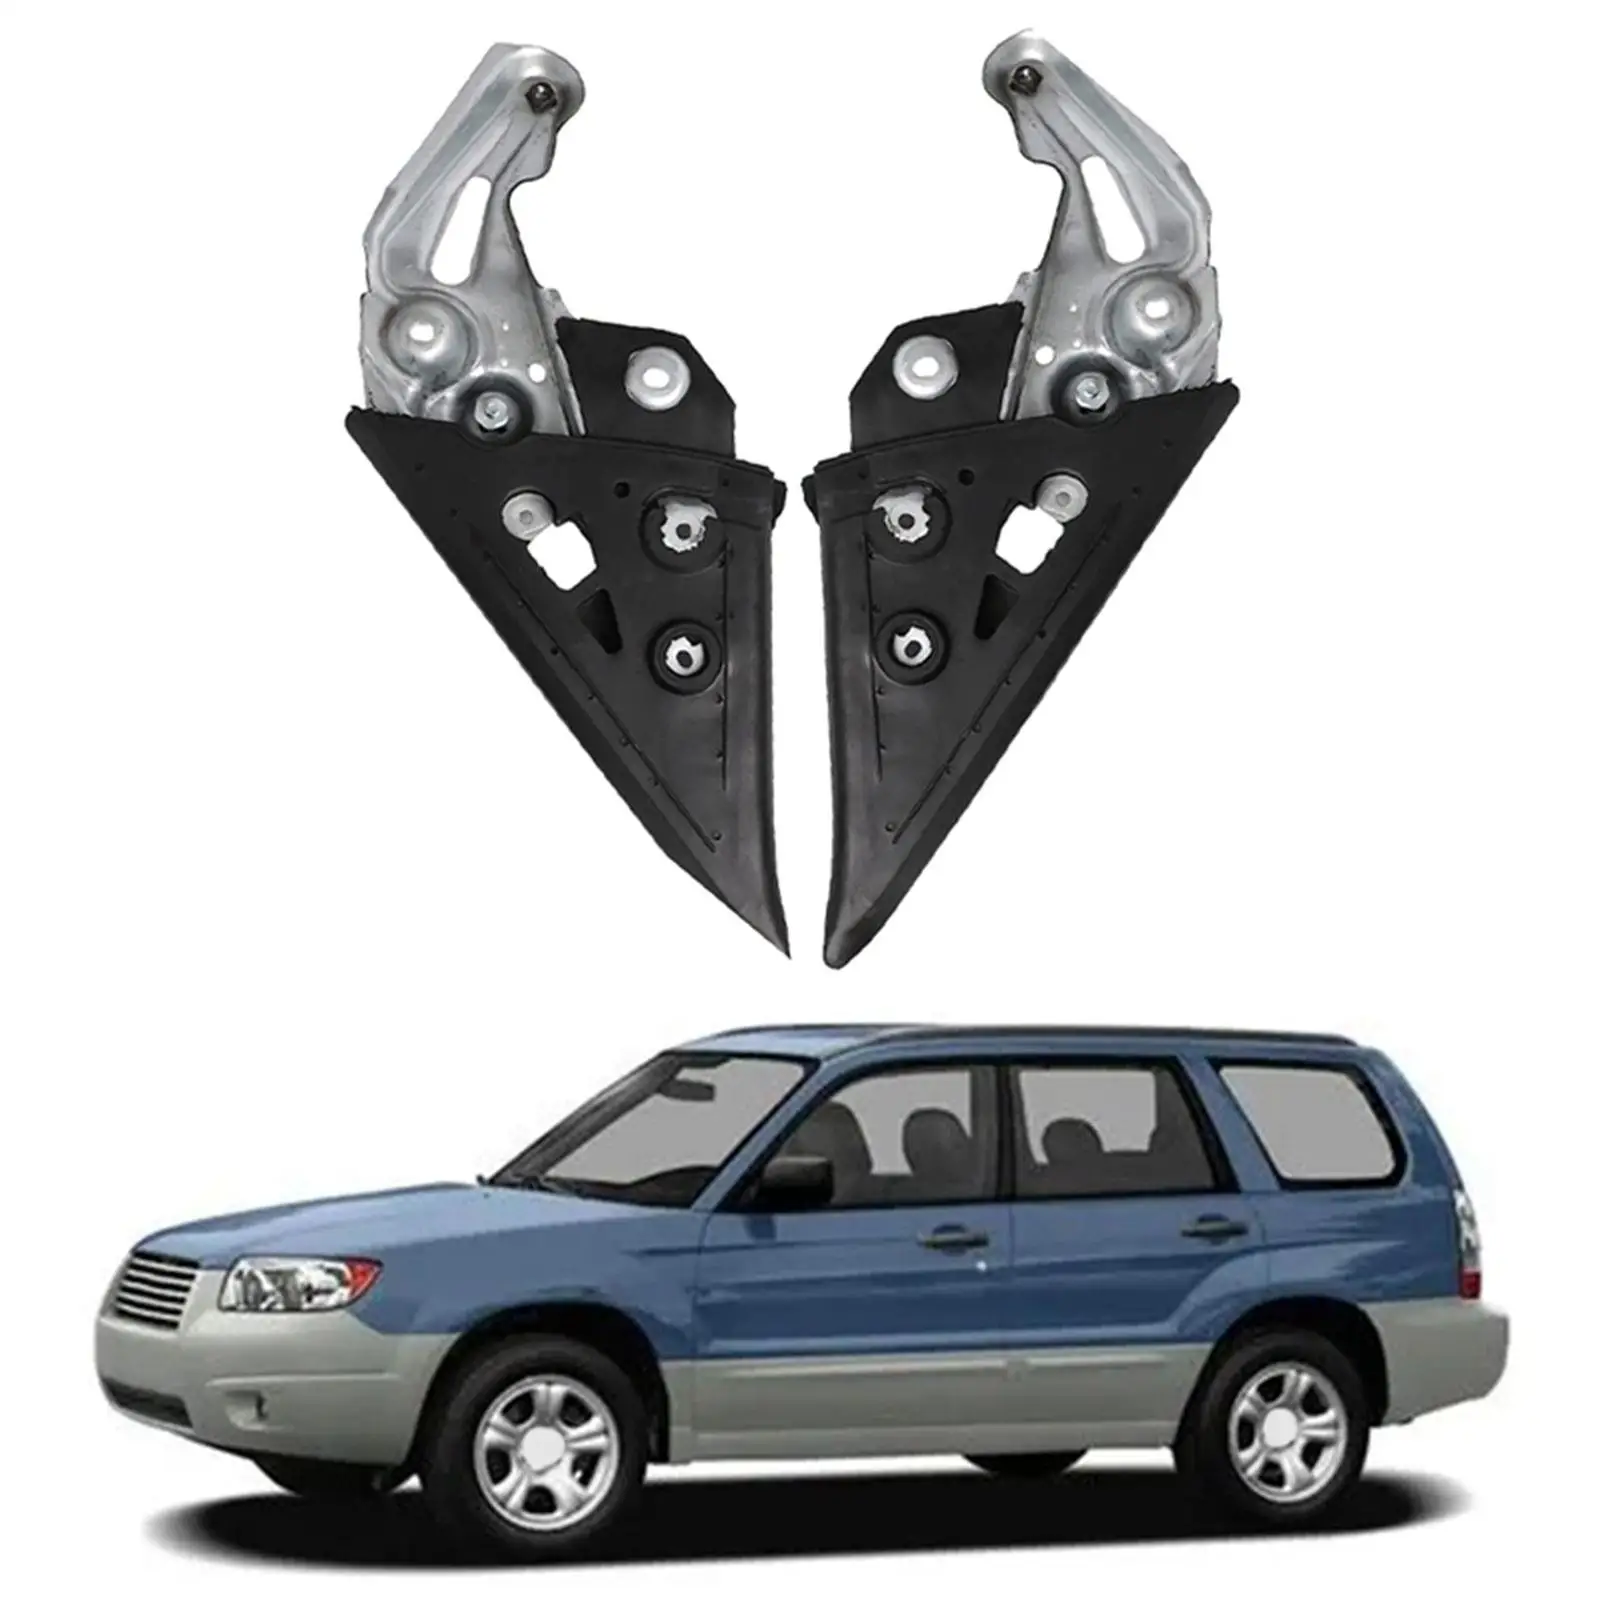 Auto Door Gusset Assembly Set Durable High 1 Pair for Forester 2003-2008